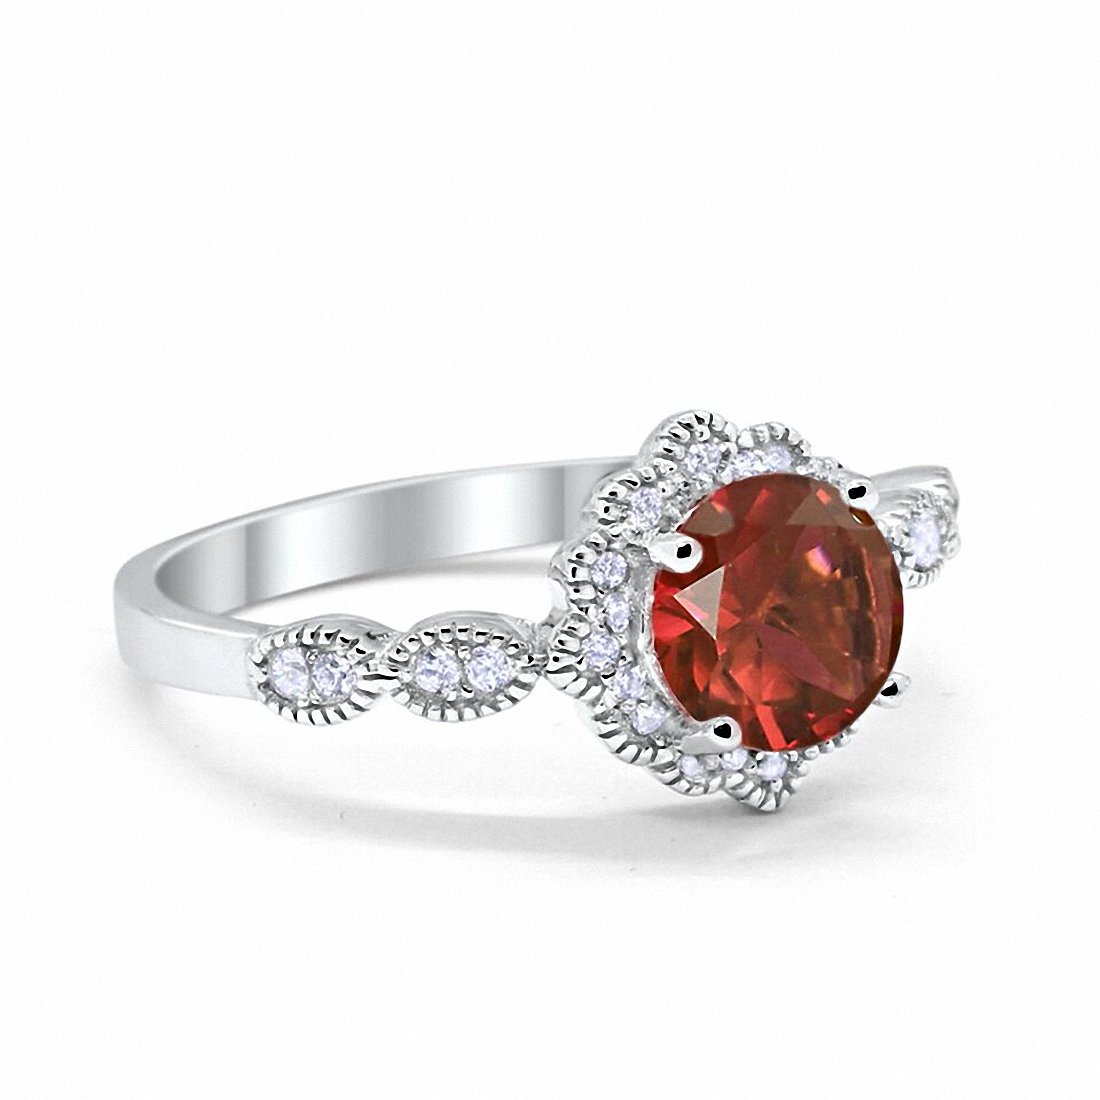 Floral Art Engagement Ring Simulated Garnet Cubic Zirconia 925 Sterling Silver